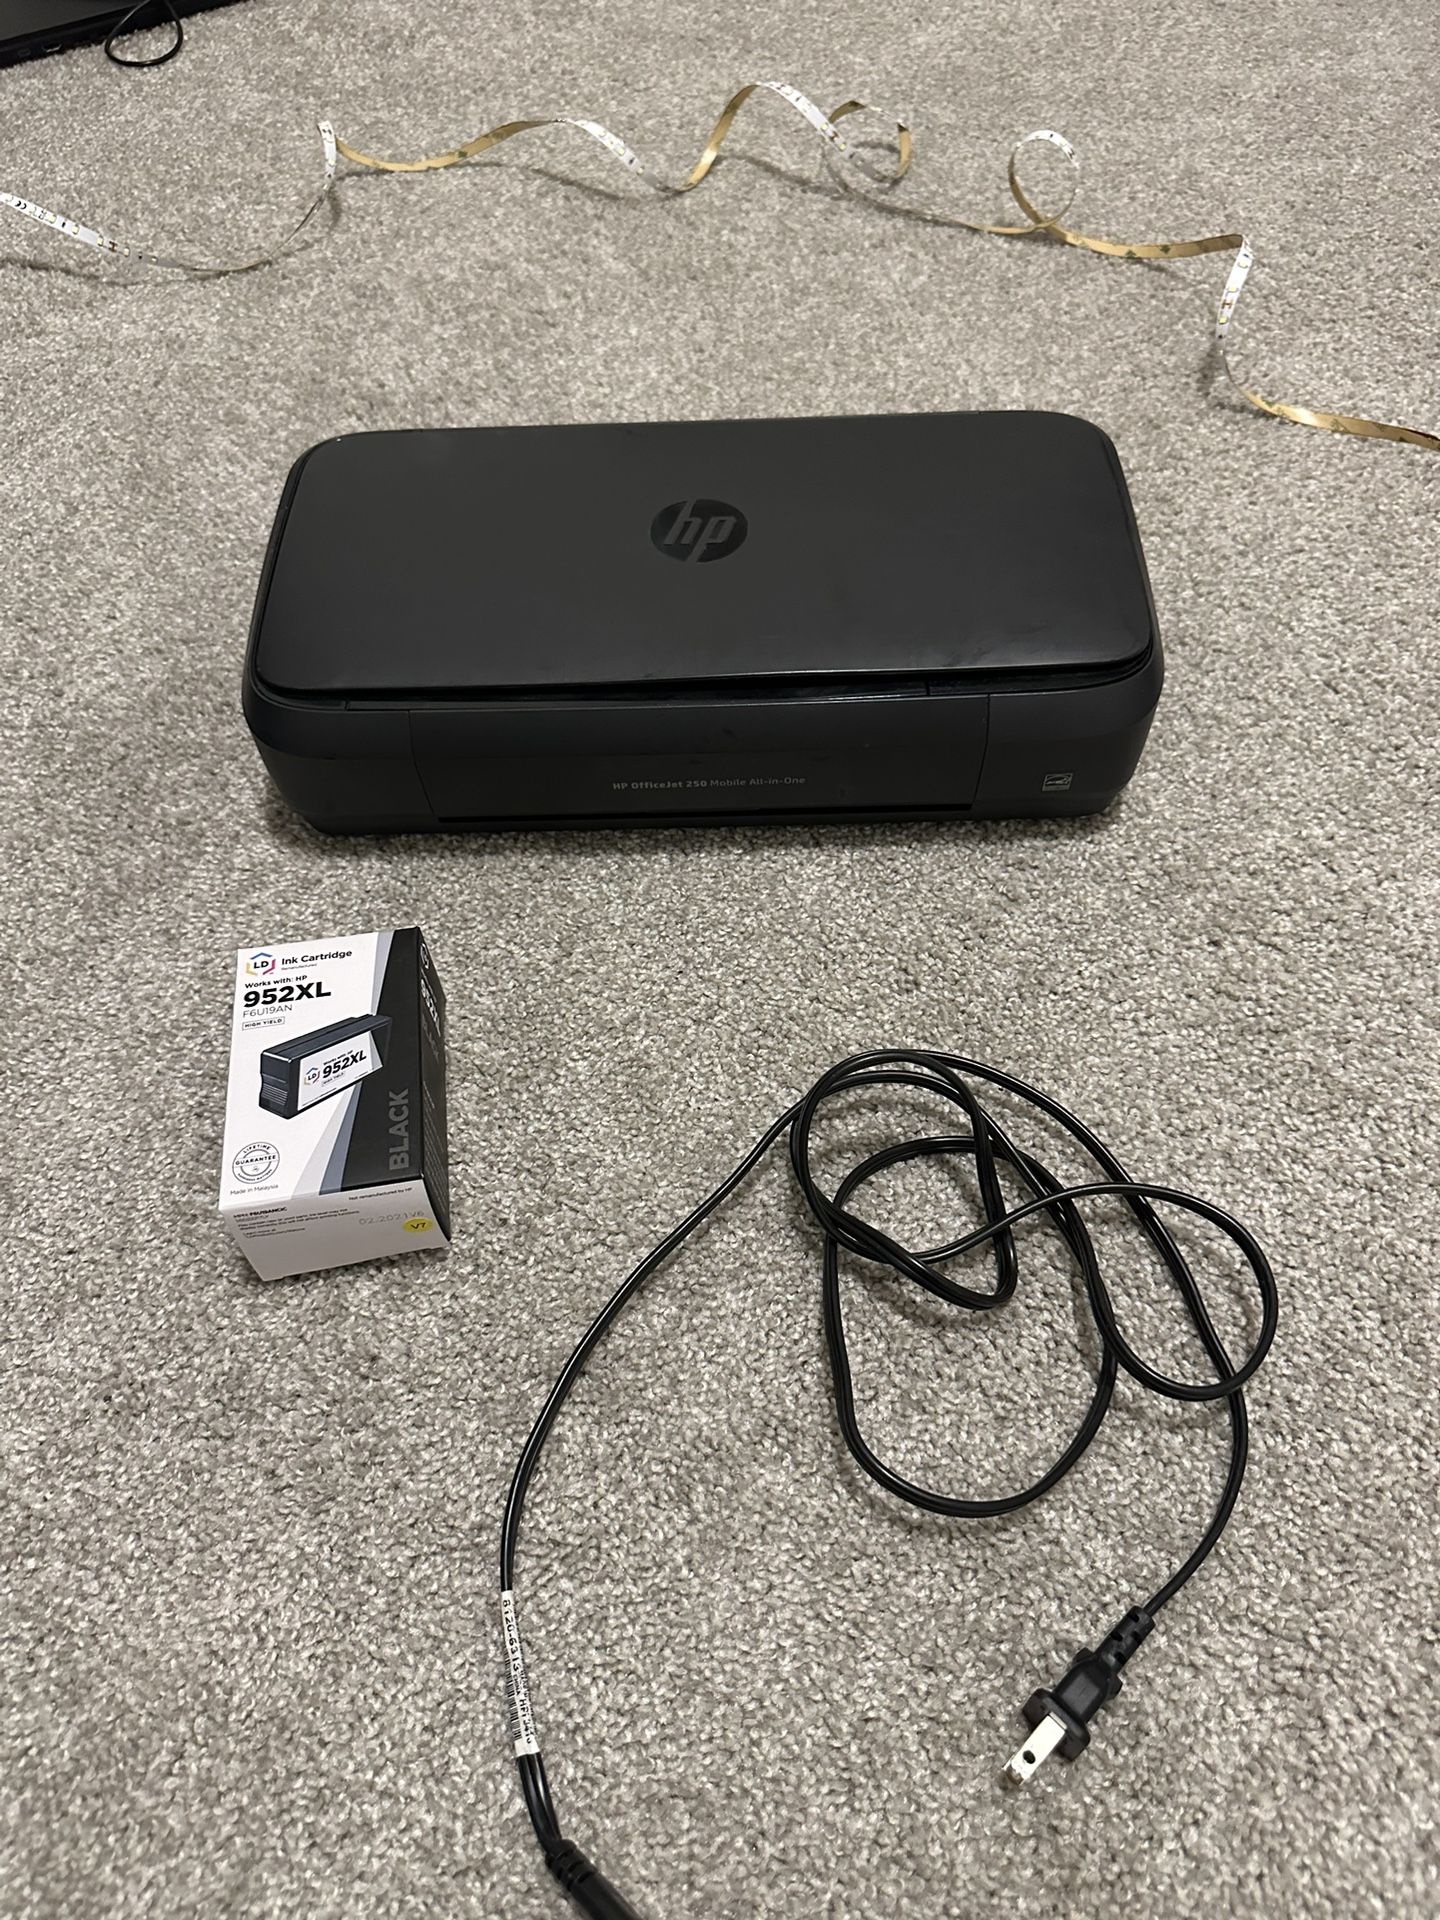 HP Office Jet 250 All-in-one